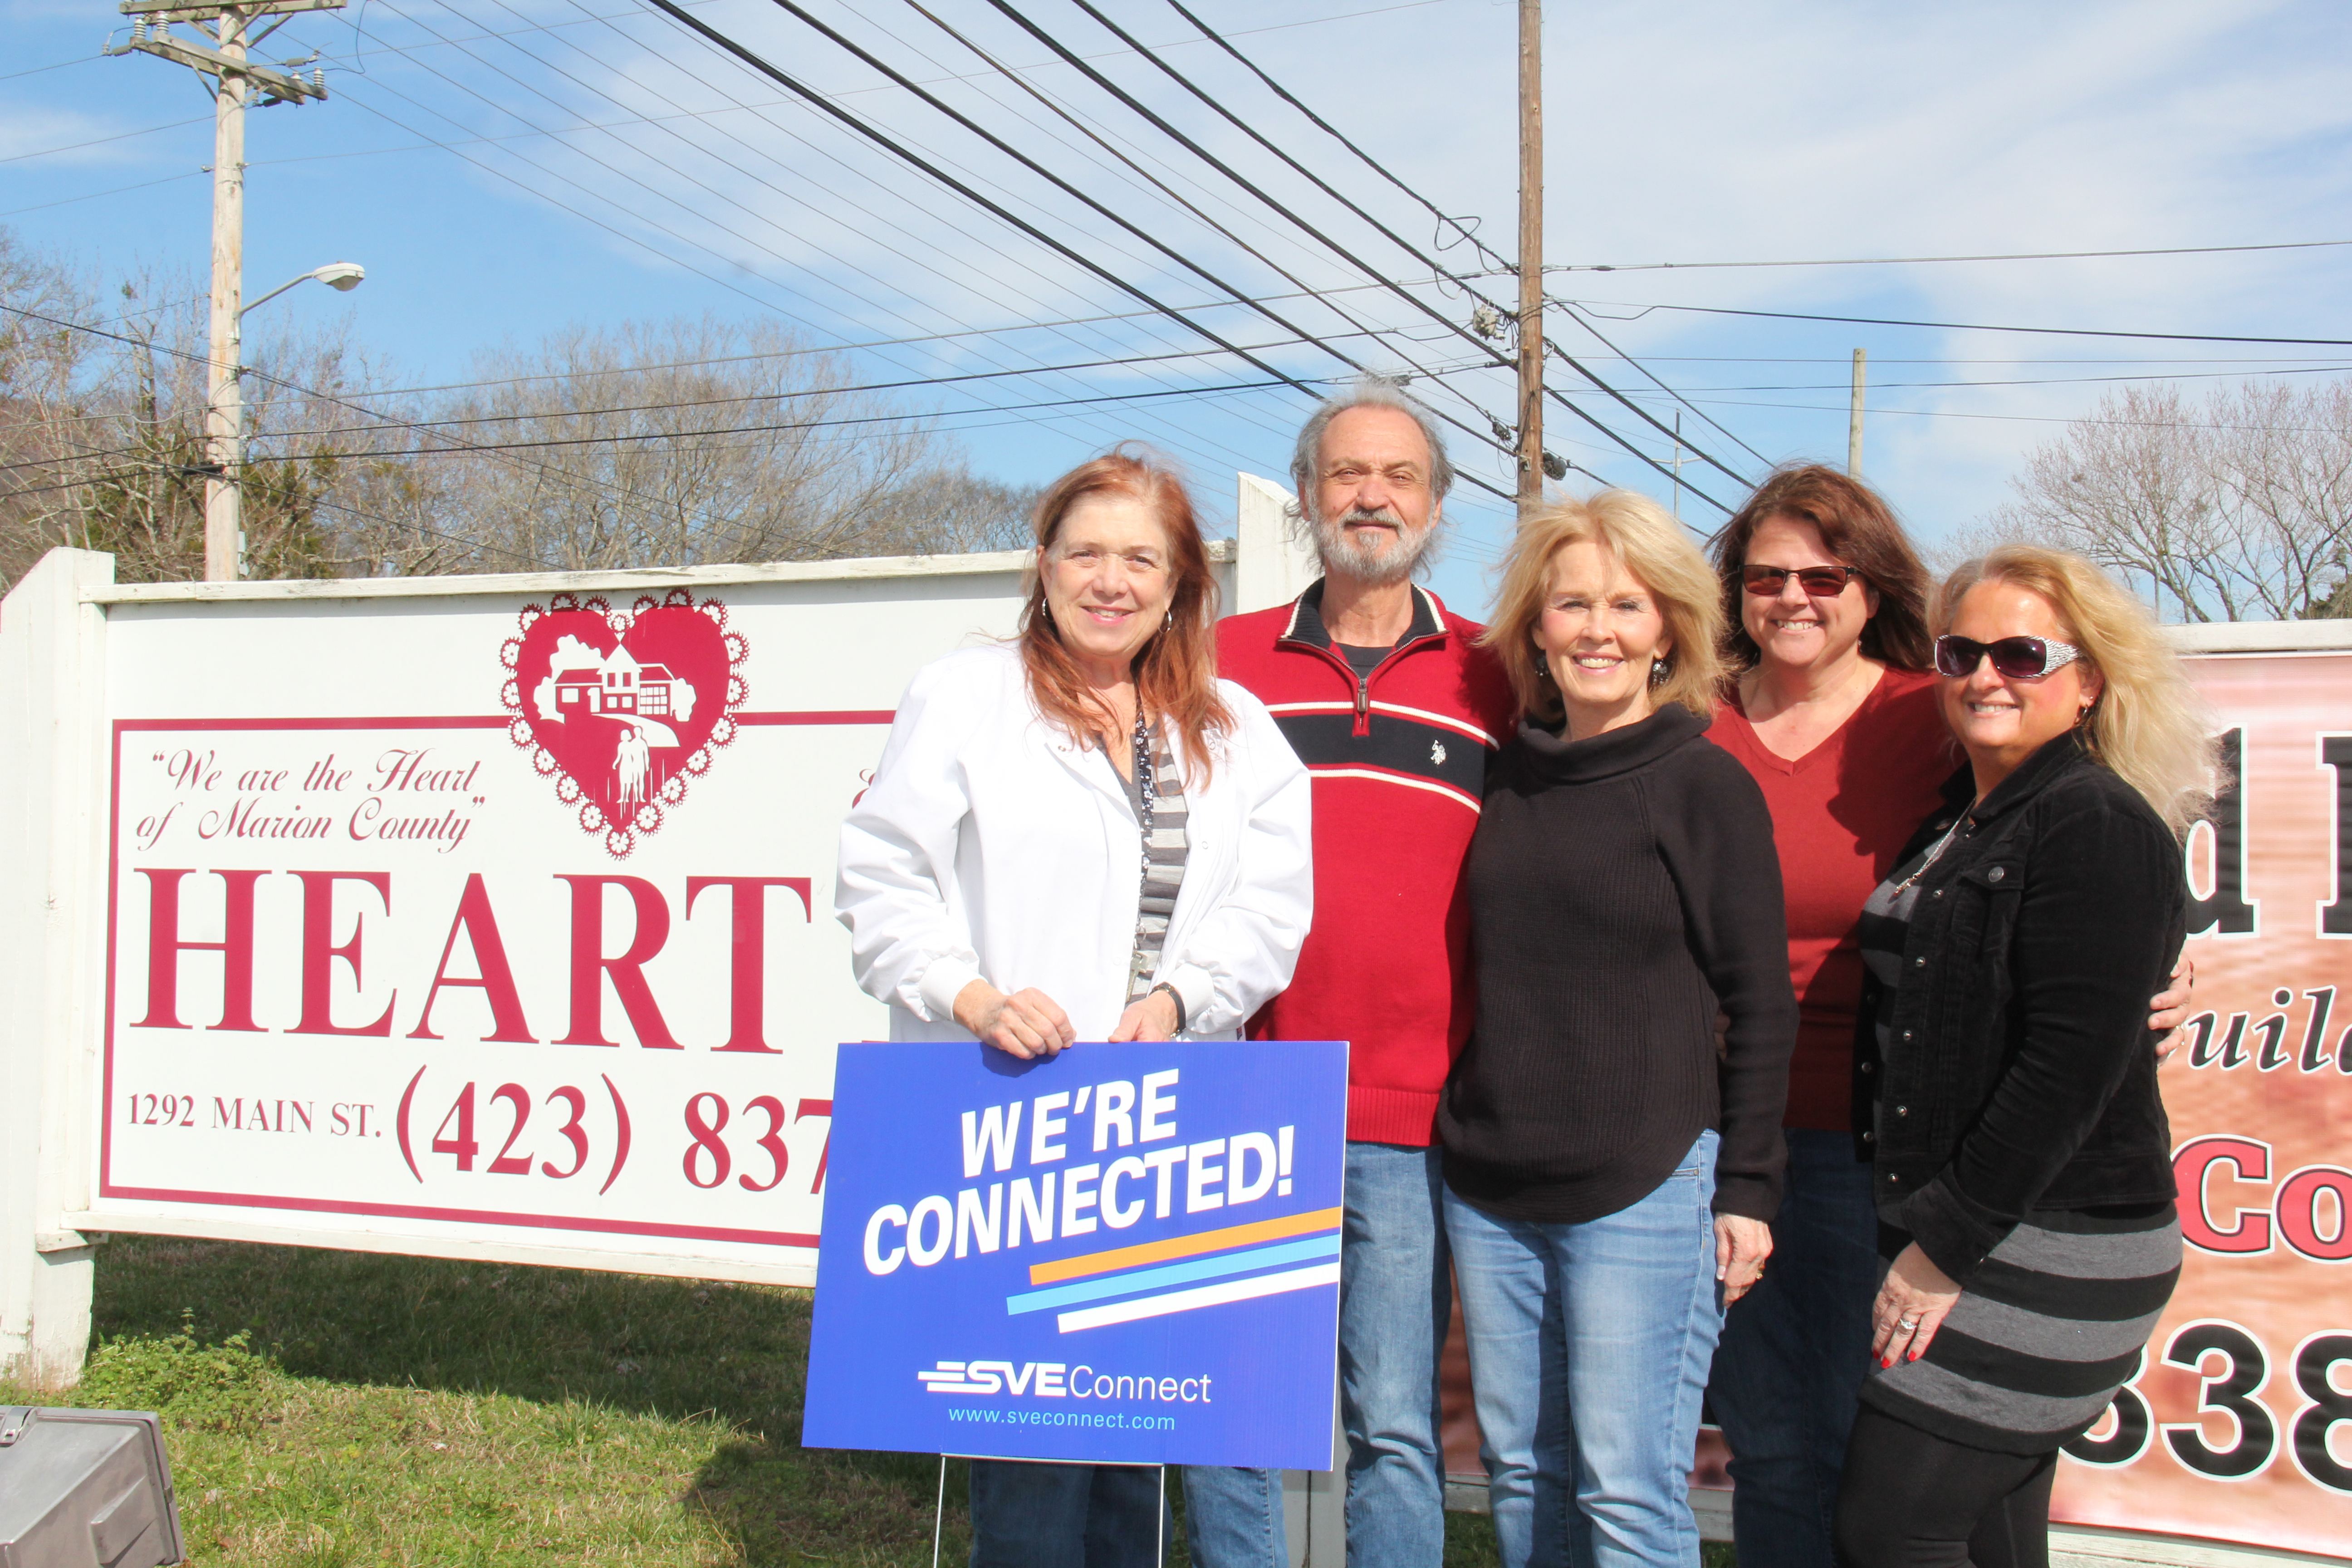 Heart Realty in Kimball is connected